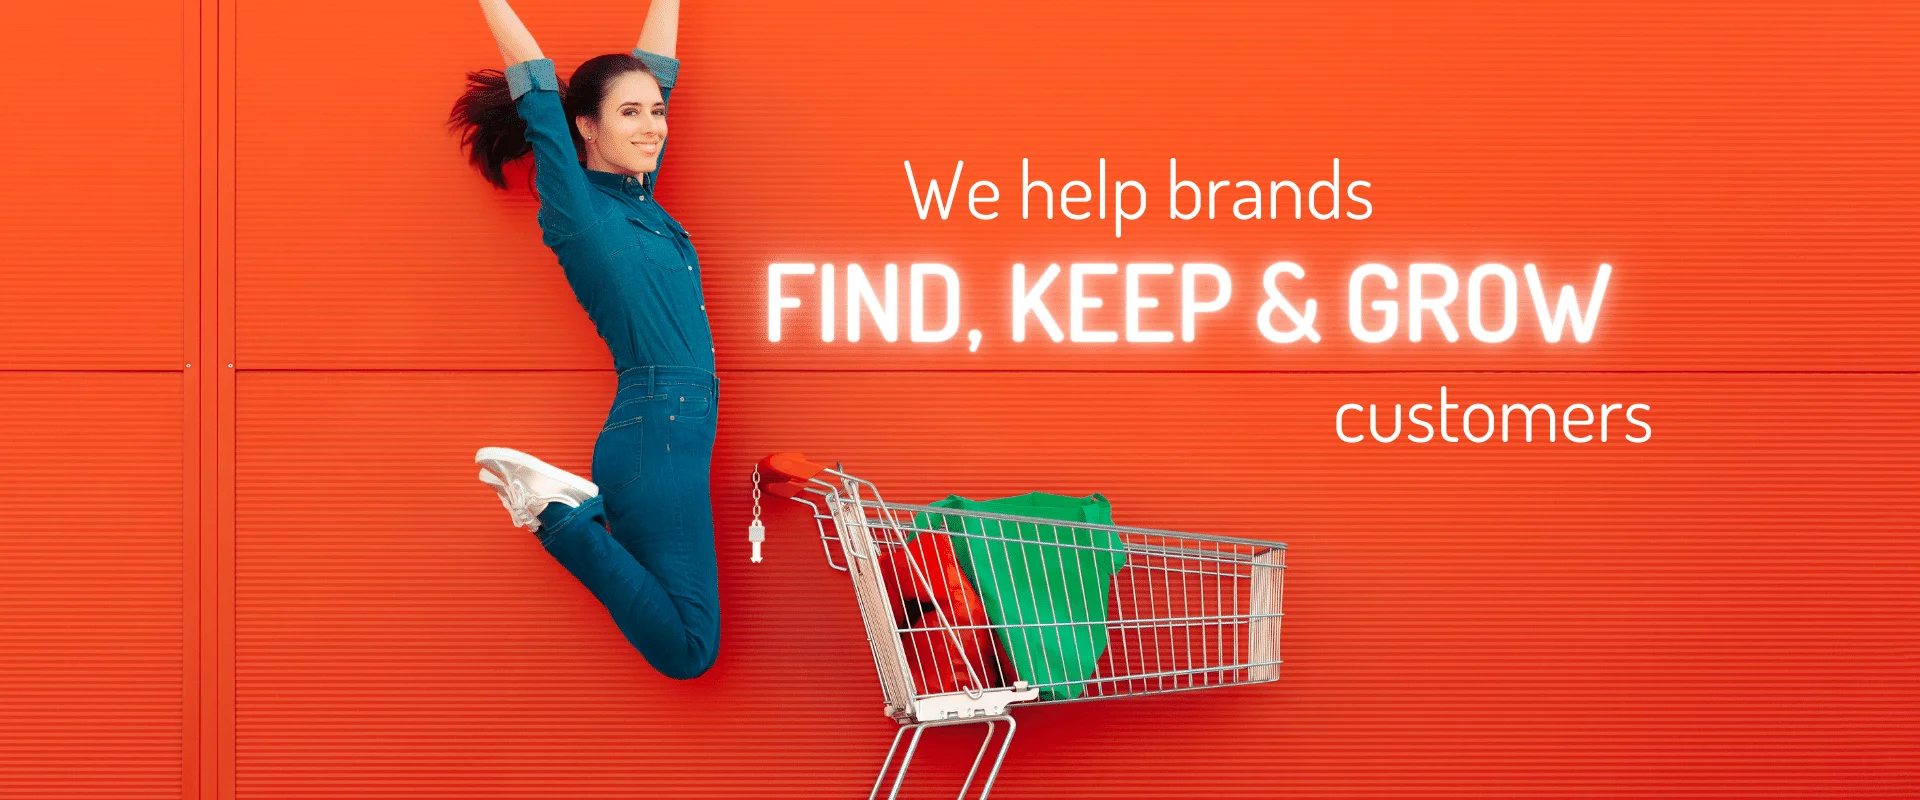 GJI Group helps brands find, help, and grow customers